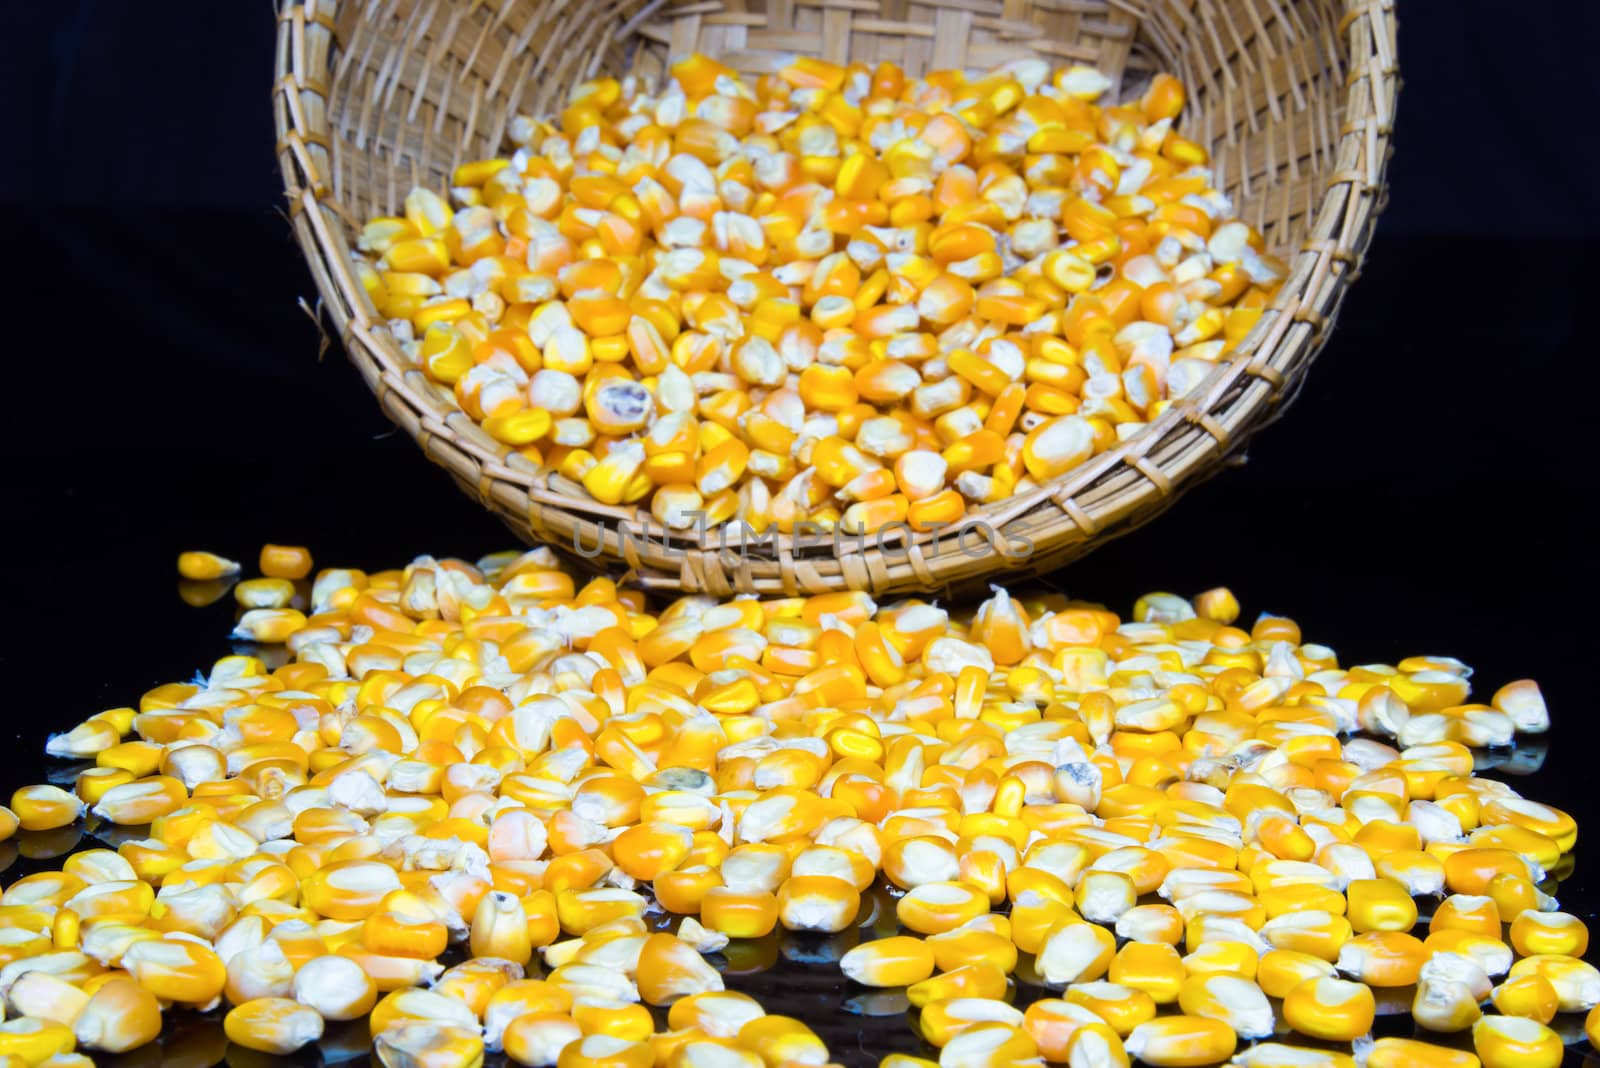 corn and corn seeds in a Basket on black background. by wmitrmatr